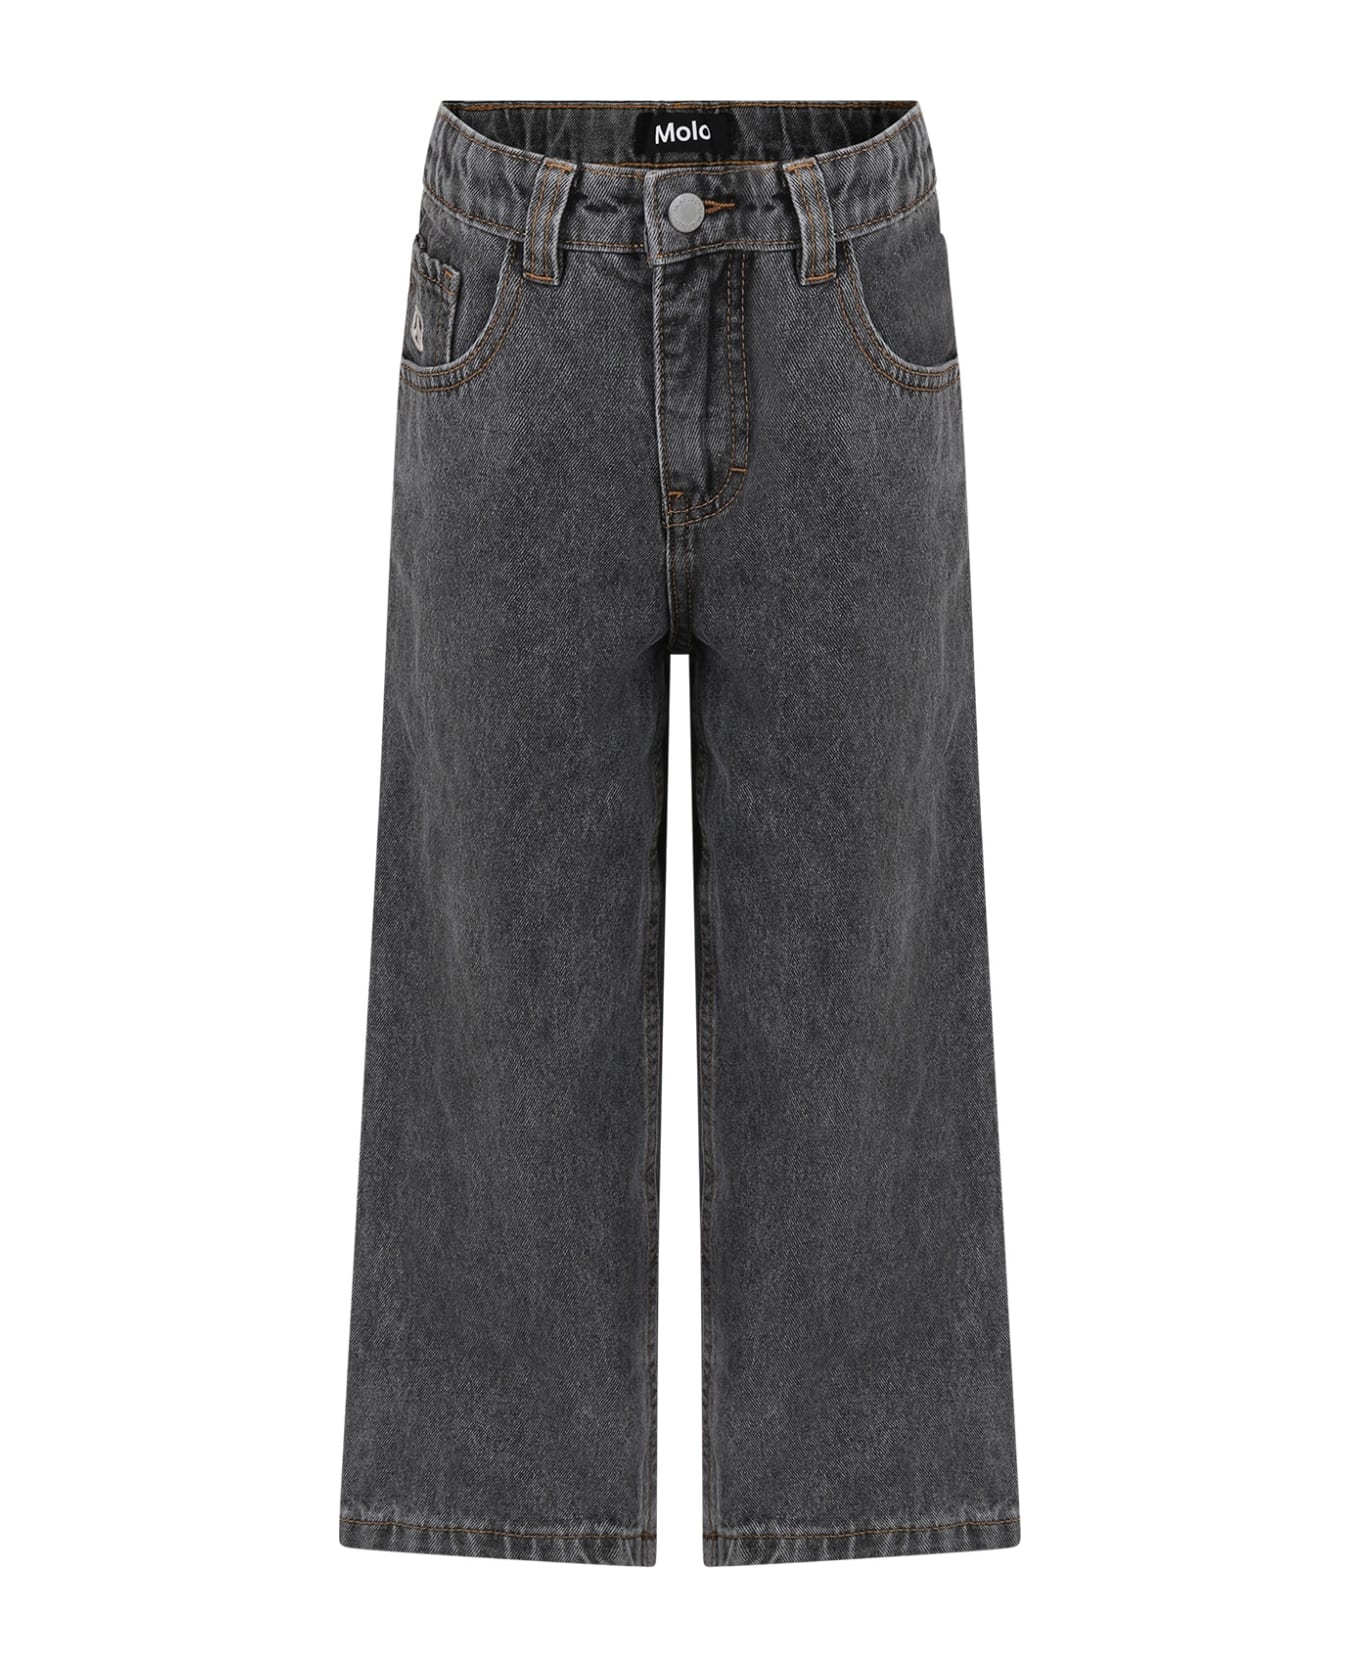 Molo Grey Jeans For Boy With Logo - Grey